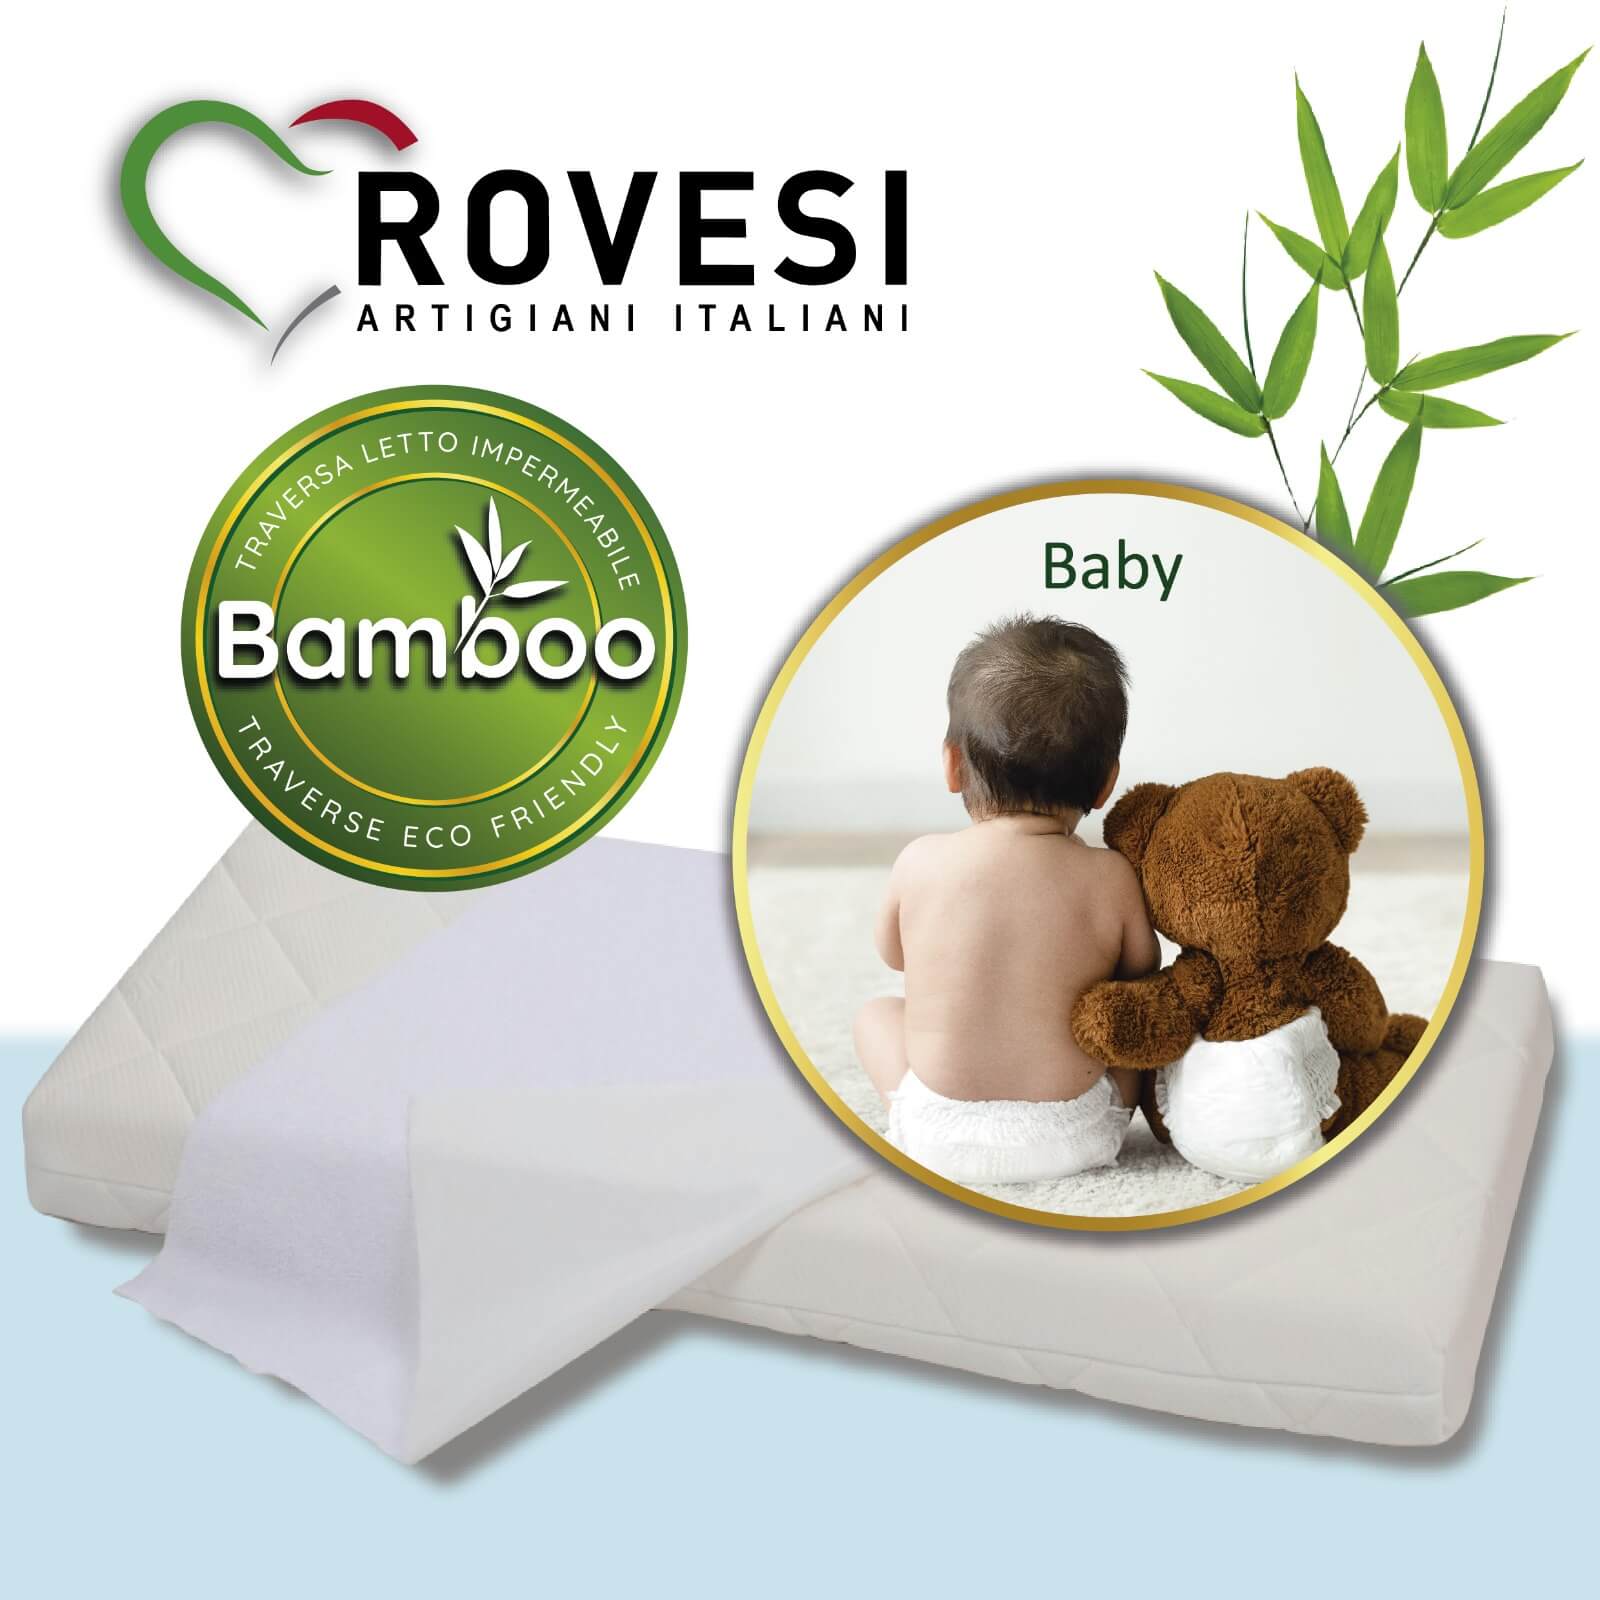 ROVESI BAMBOO CROSSPIECES washable, waterproof, absorbent. Double